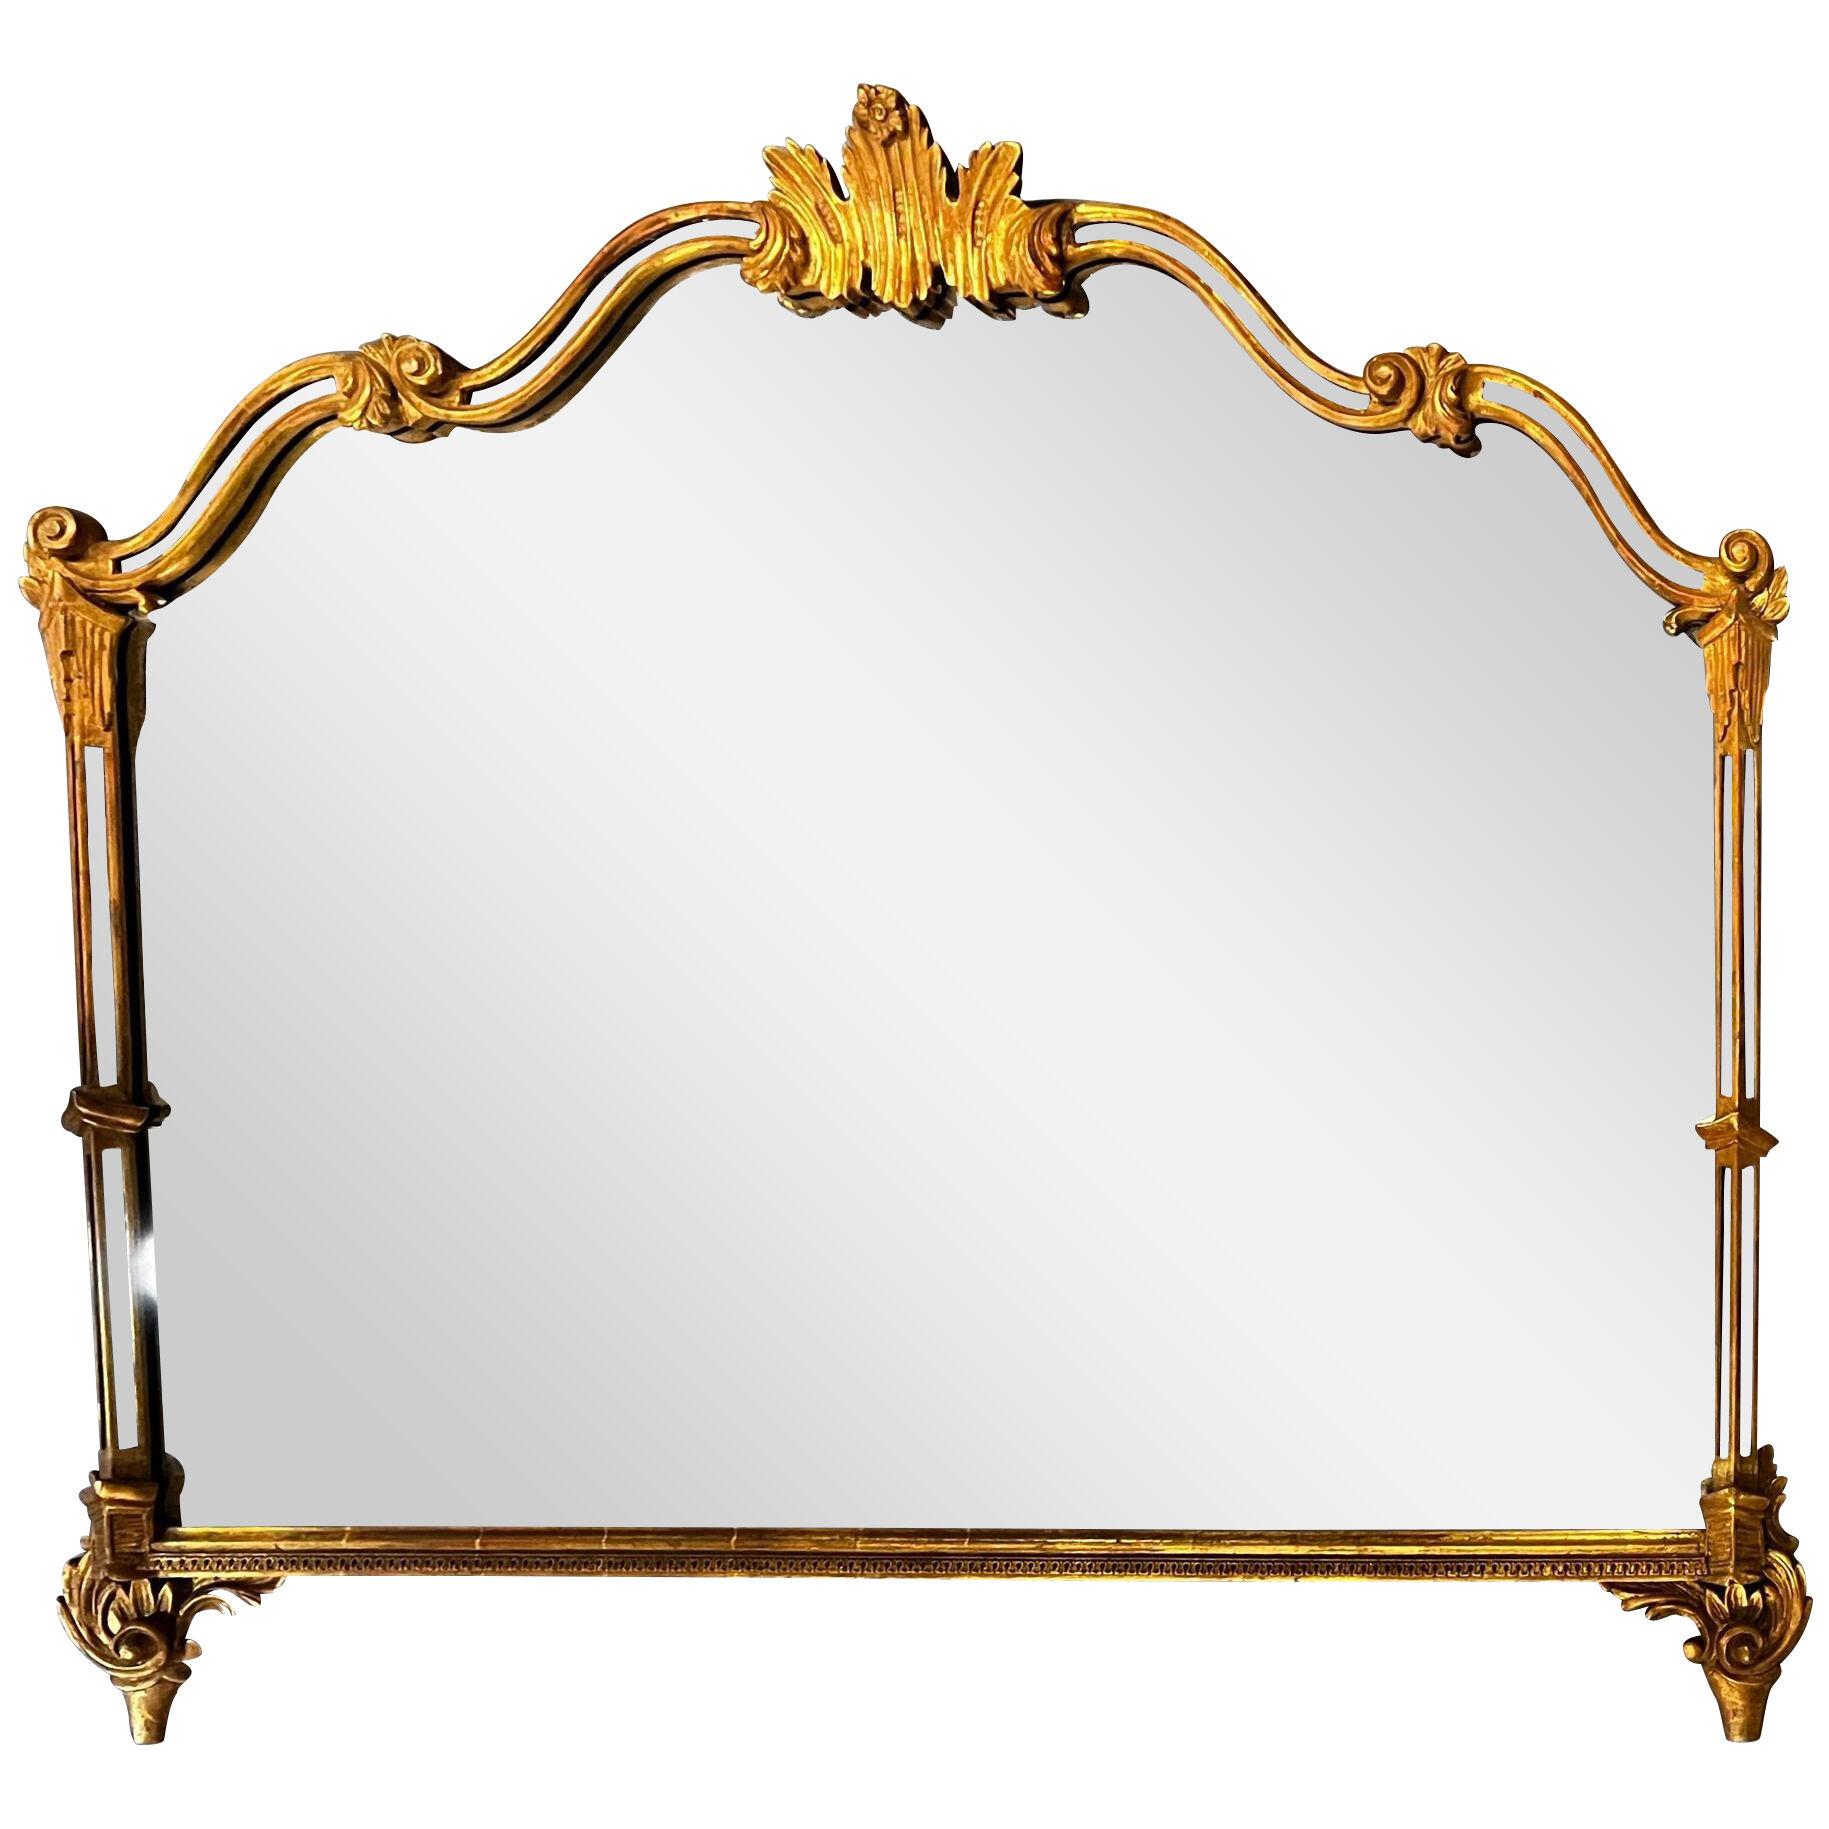 A Giltwood Over the Mantel, Console or Wall Mirror, Regency Style, Italian